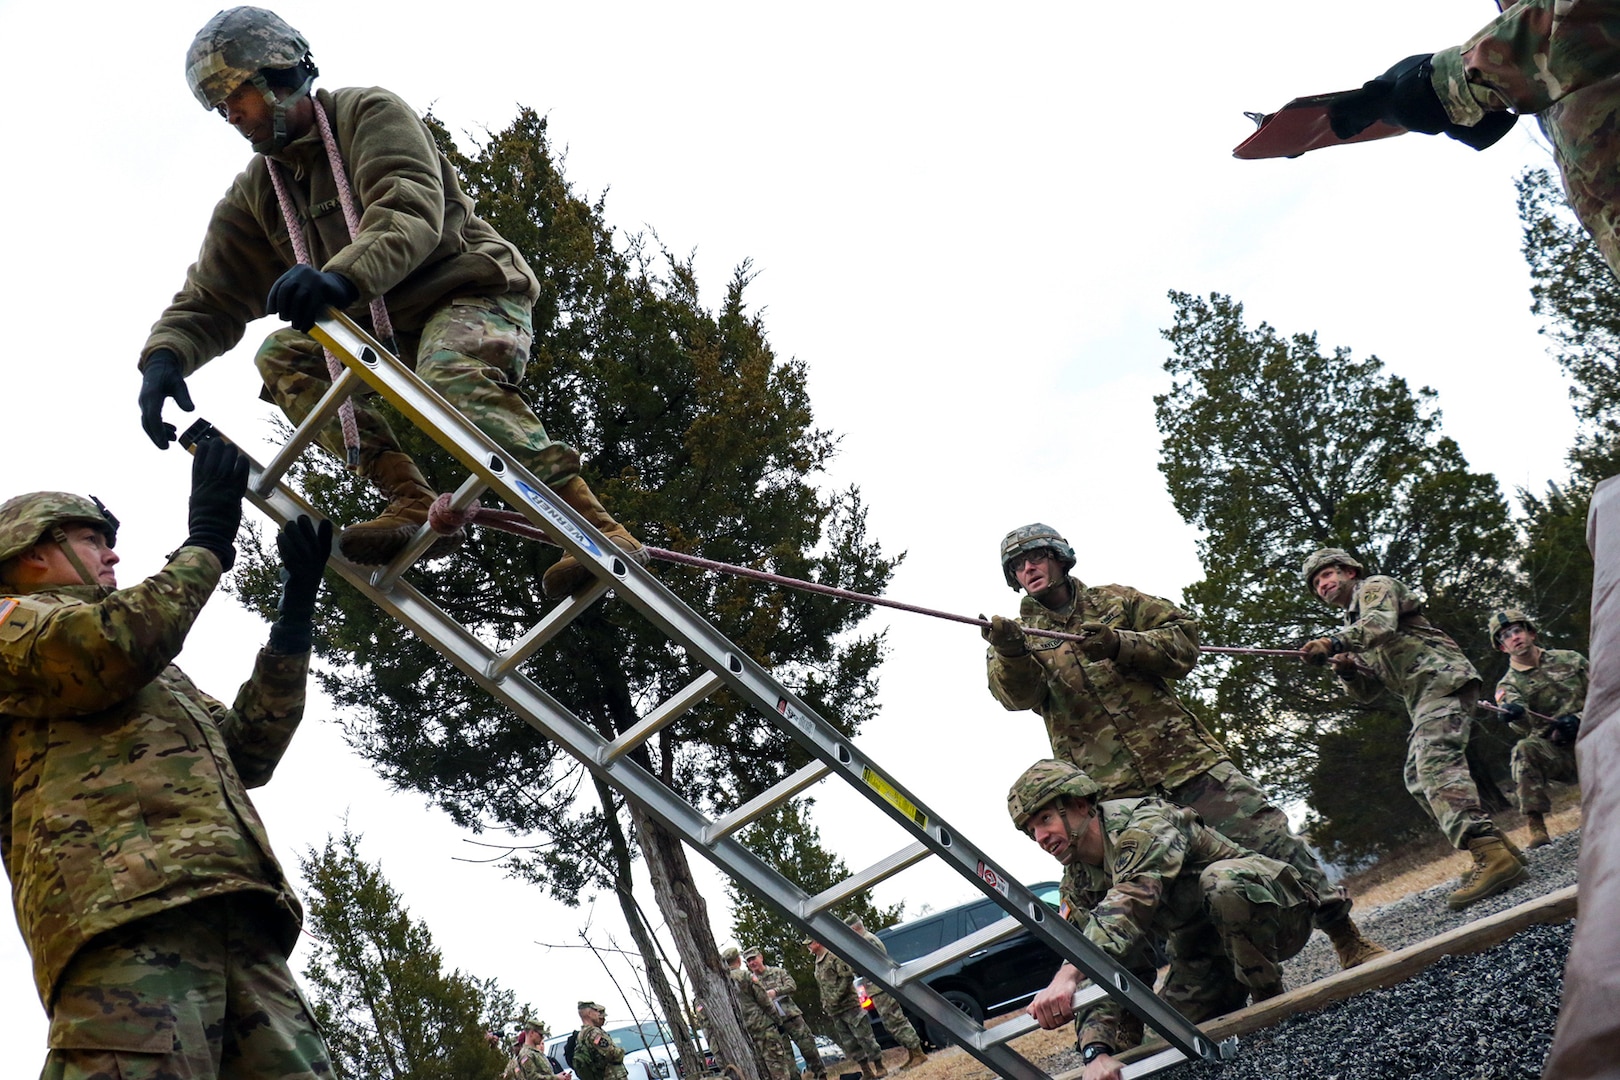 Candidates during the Battalion Commander Assessment Program traverse an obstacle during the evaluation process at Fort Knox, Kentucky Jan. 23. More than 800 officers competed in the cognitive and non-cognitive, physical, verbal, and written assessments before being selected for battalion command.